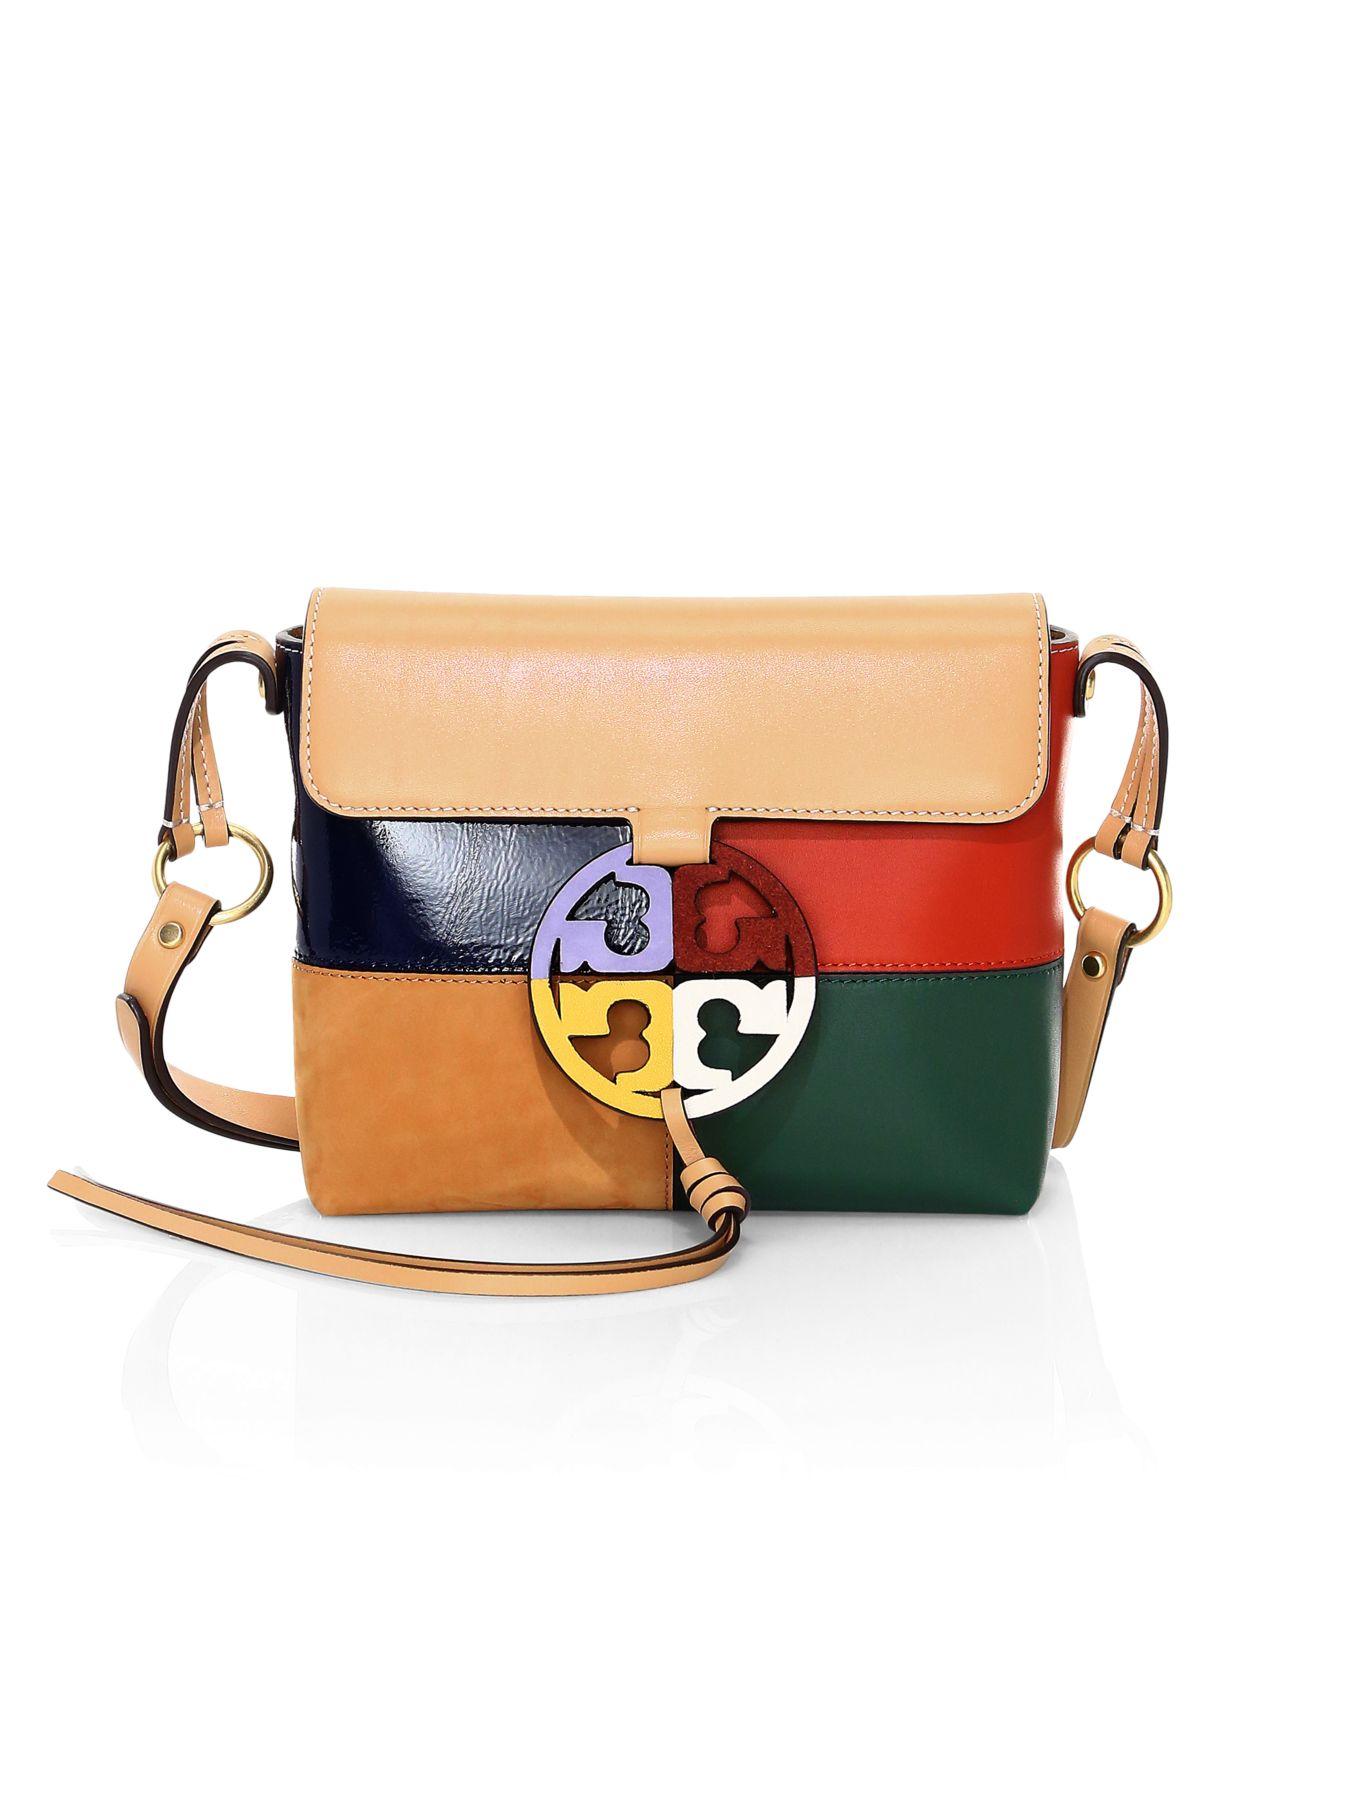 Tory Burch Leather Miller Color Block Crossbody | Lyst